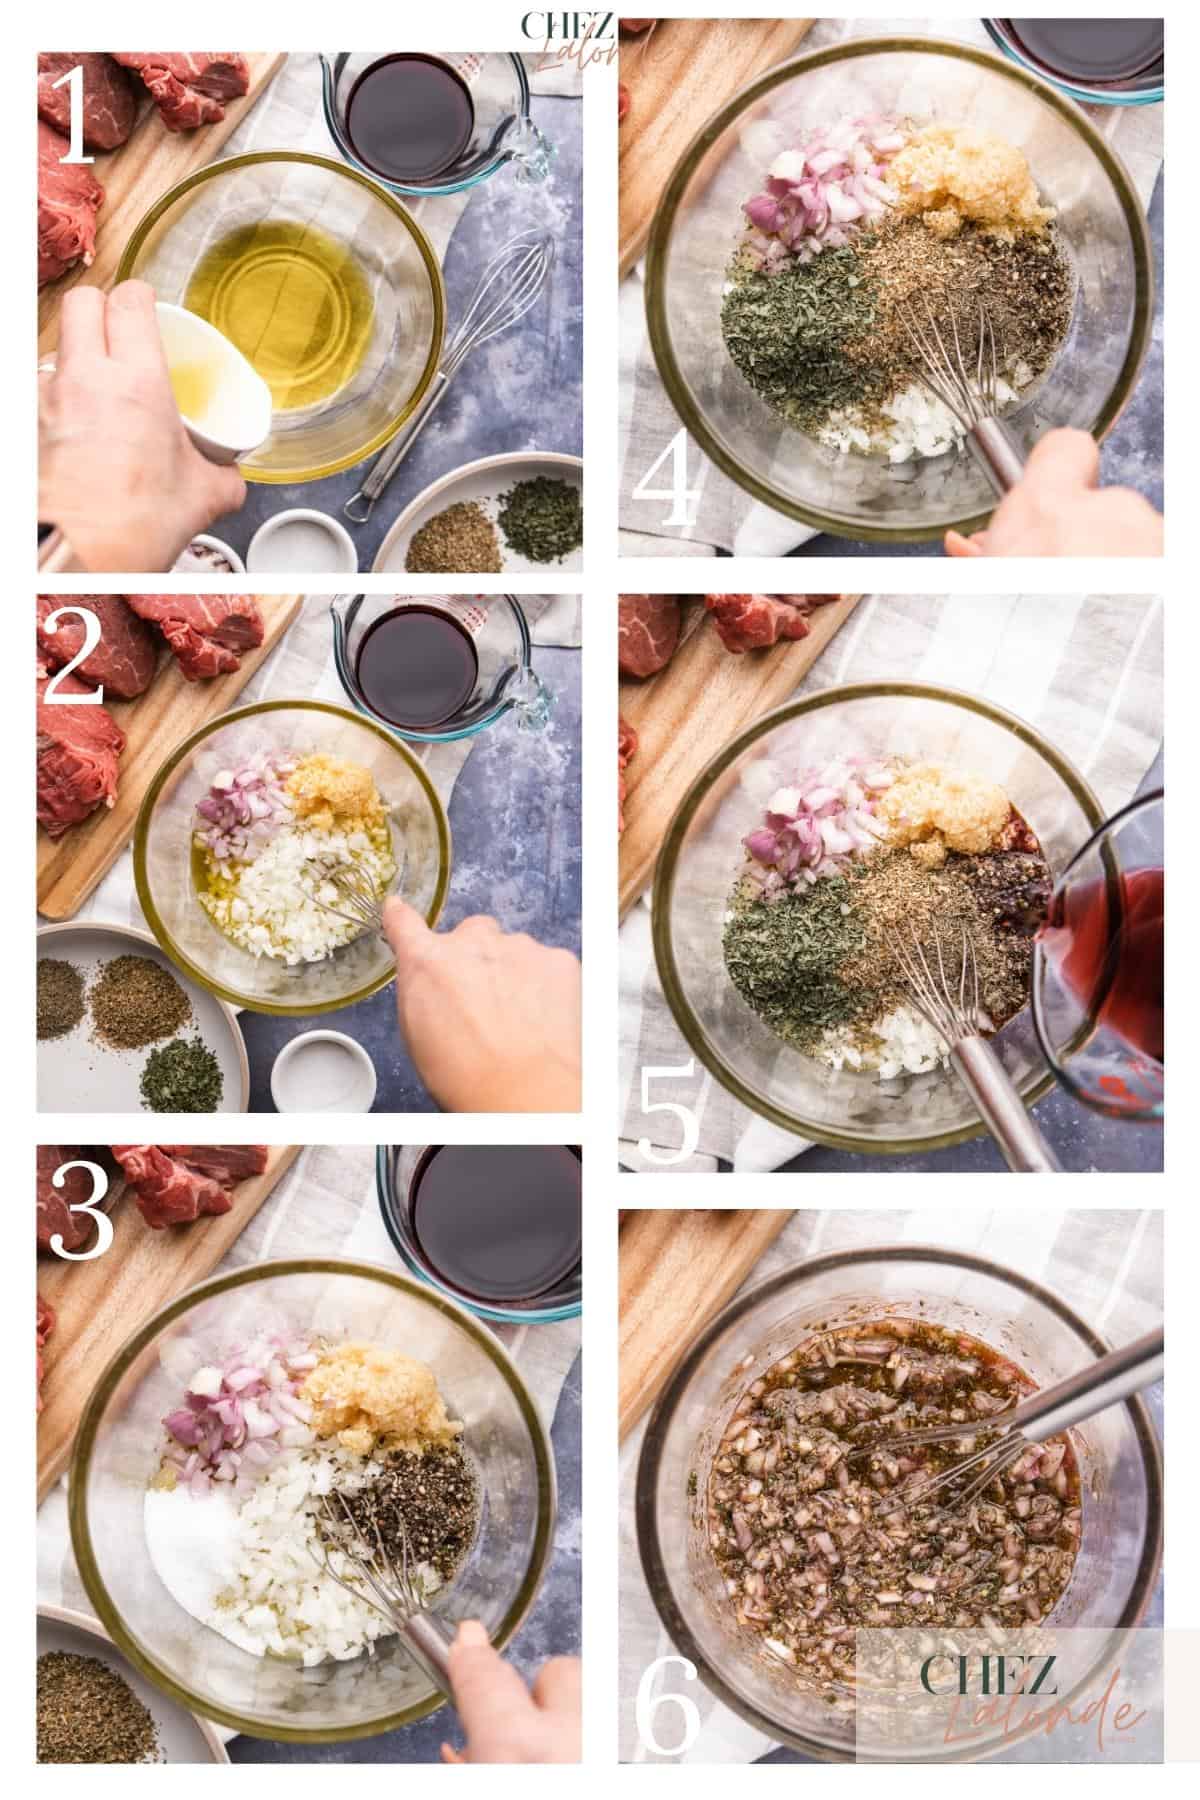 Red wine and herb marinade step by step demo.